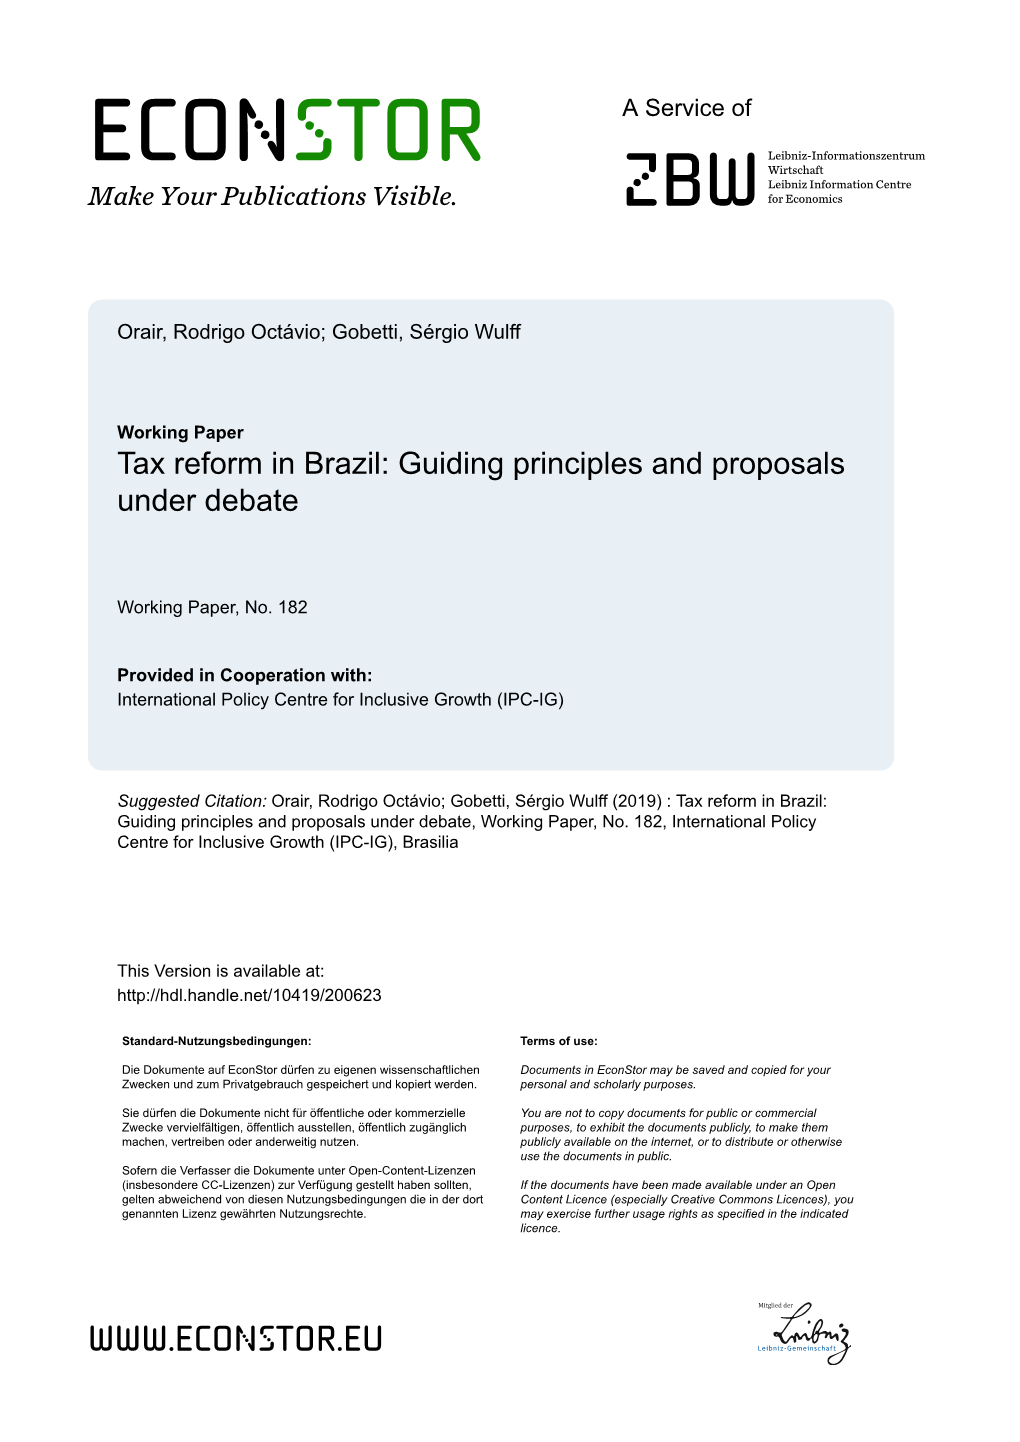 Tax Reform in Brazil: Guiding Principles and Proposals Under Debate